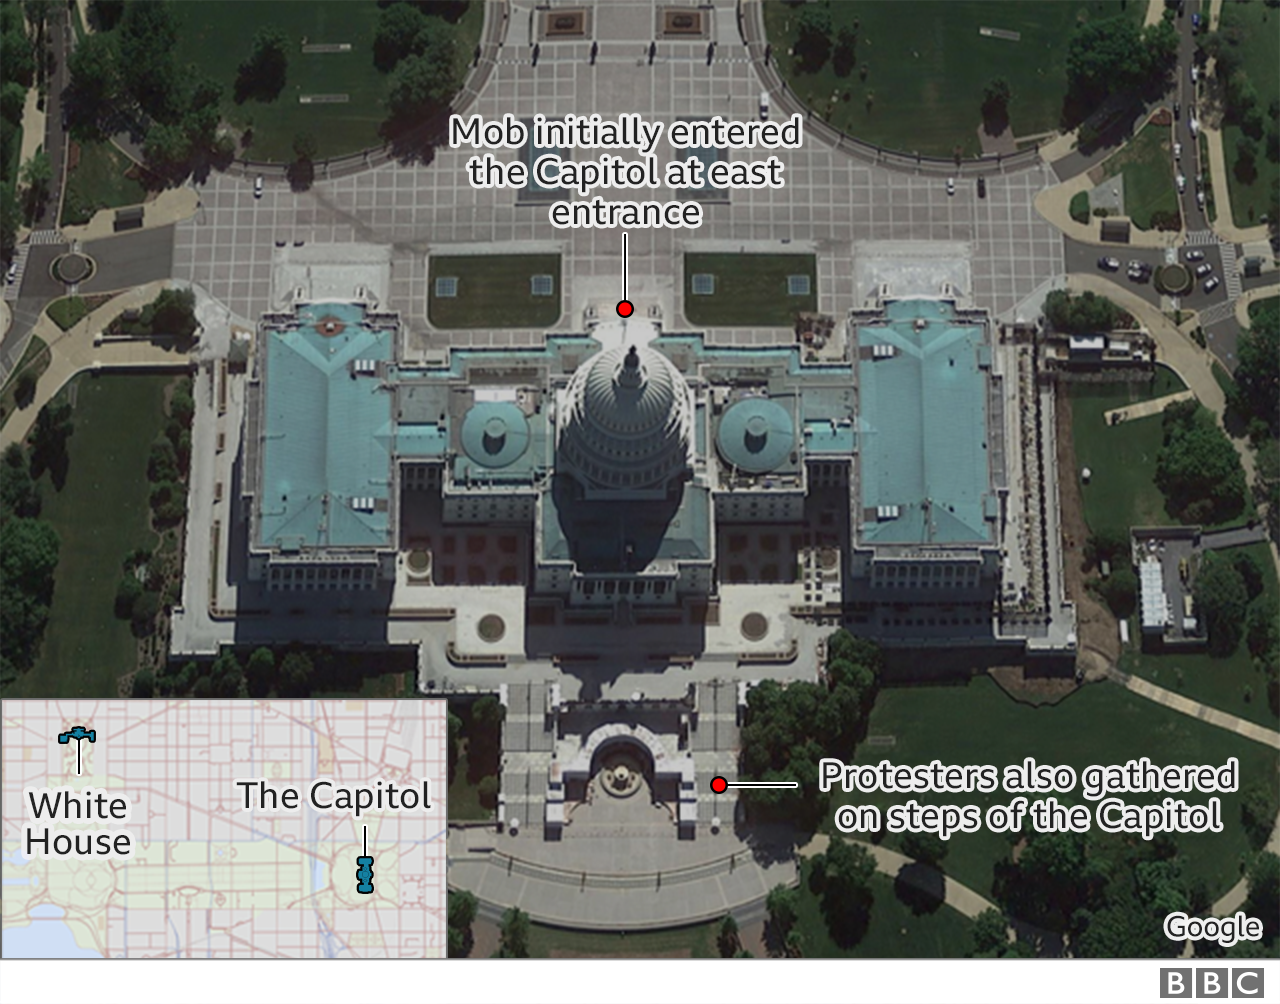 Satellite image of the Capitol showing where mob entered at the east entrance